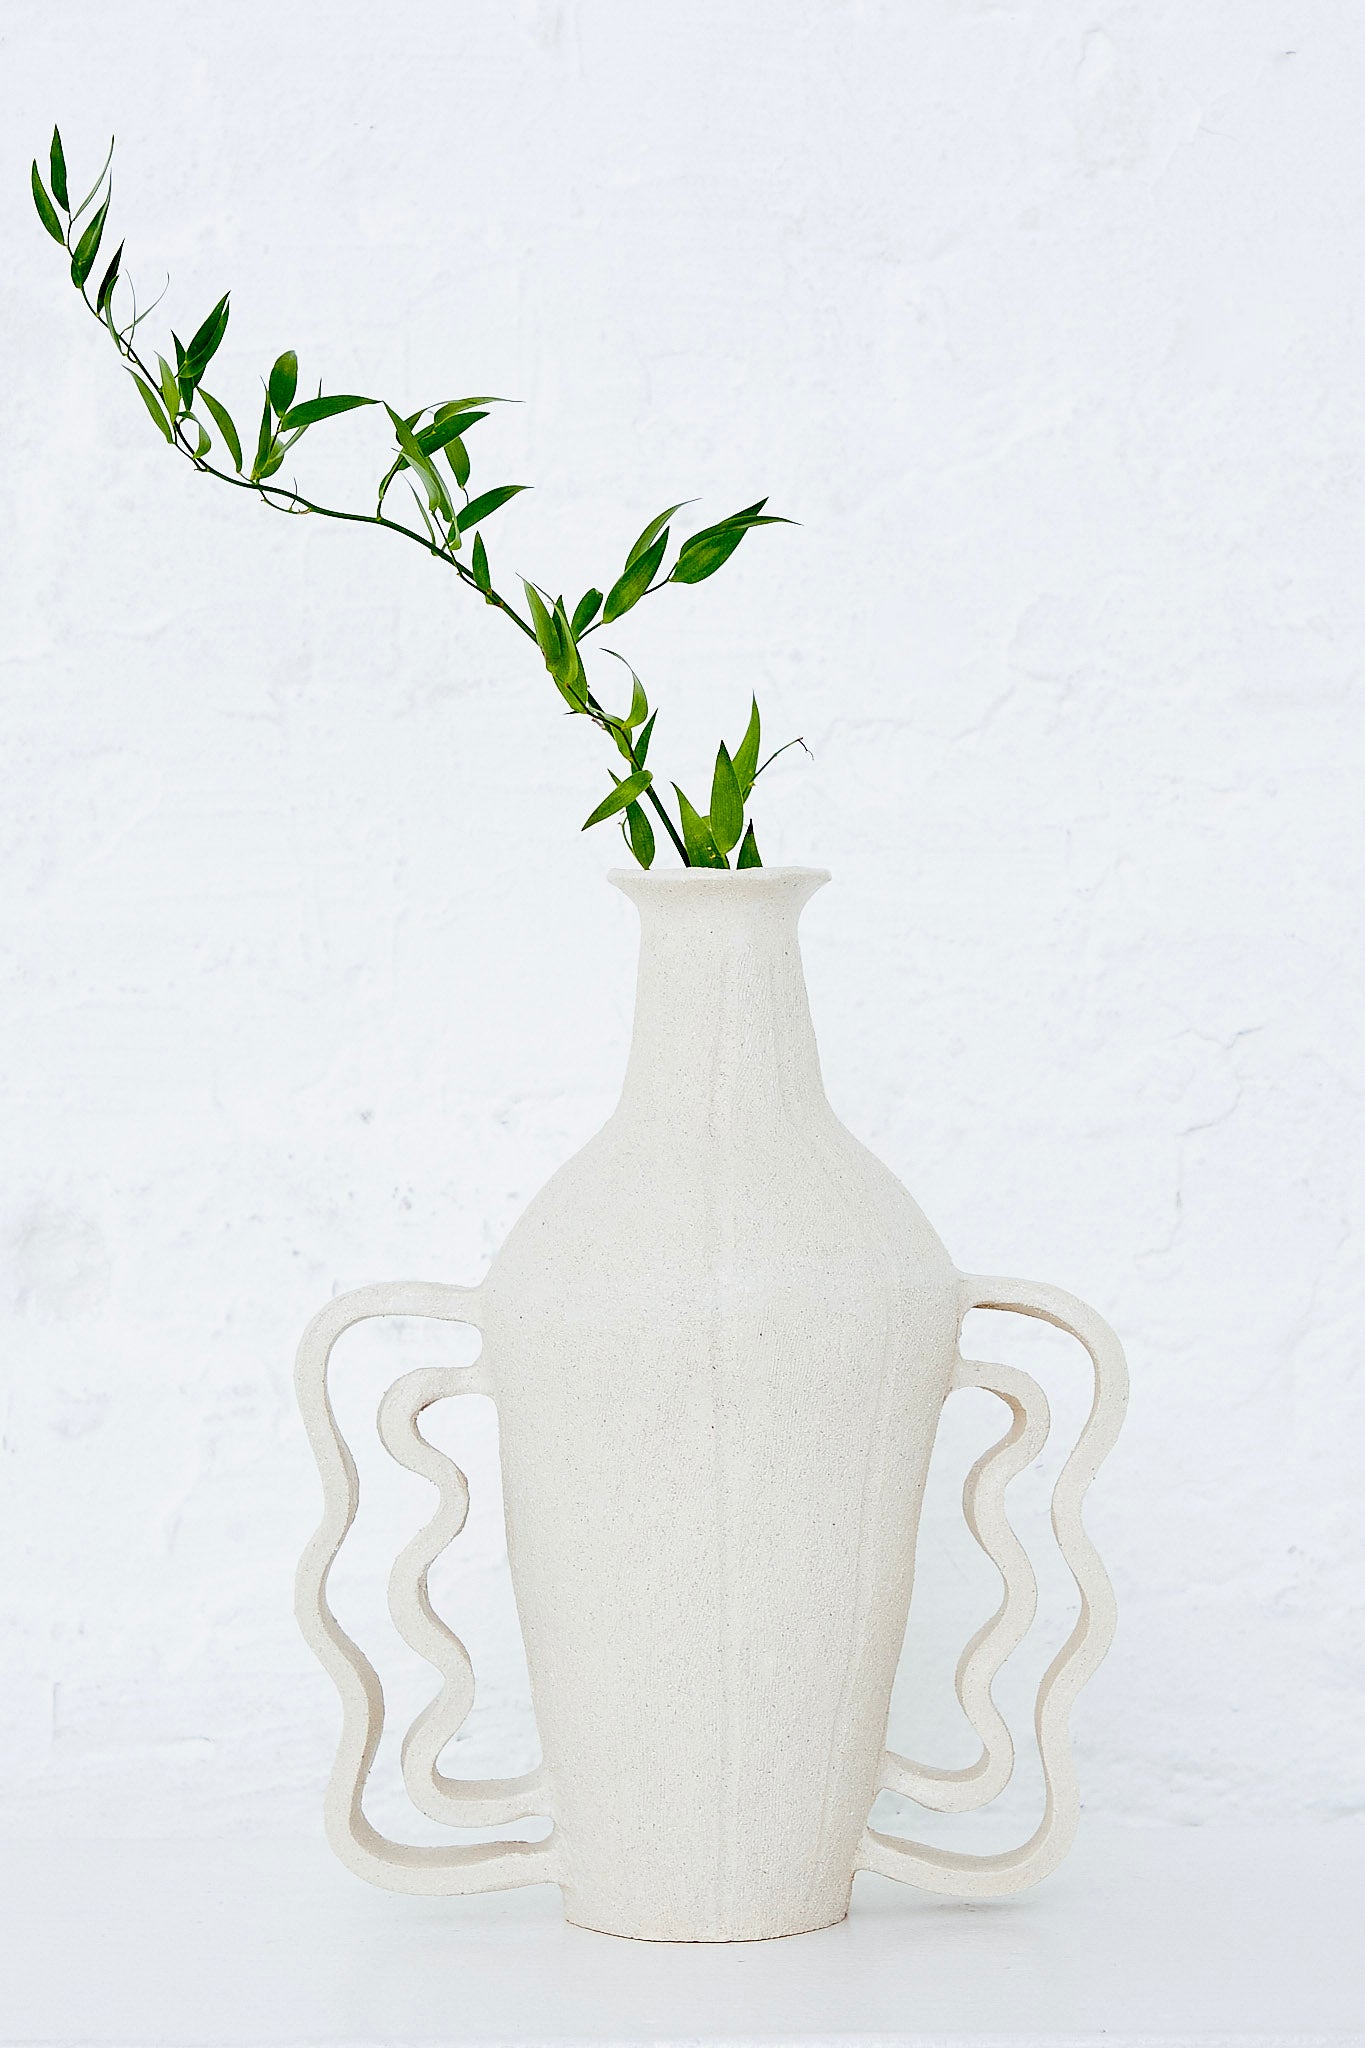 A white Clandestine handmade ceramic Amphora Le Grand Doubles Vagues vase with a green plant in it.